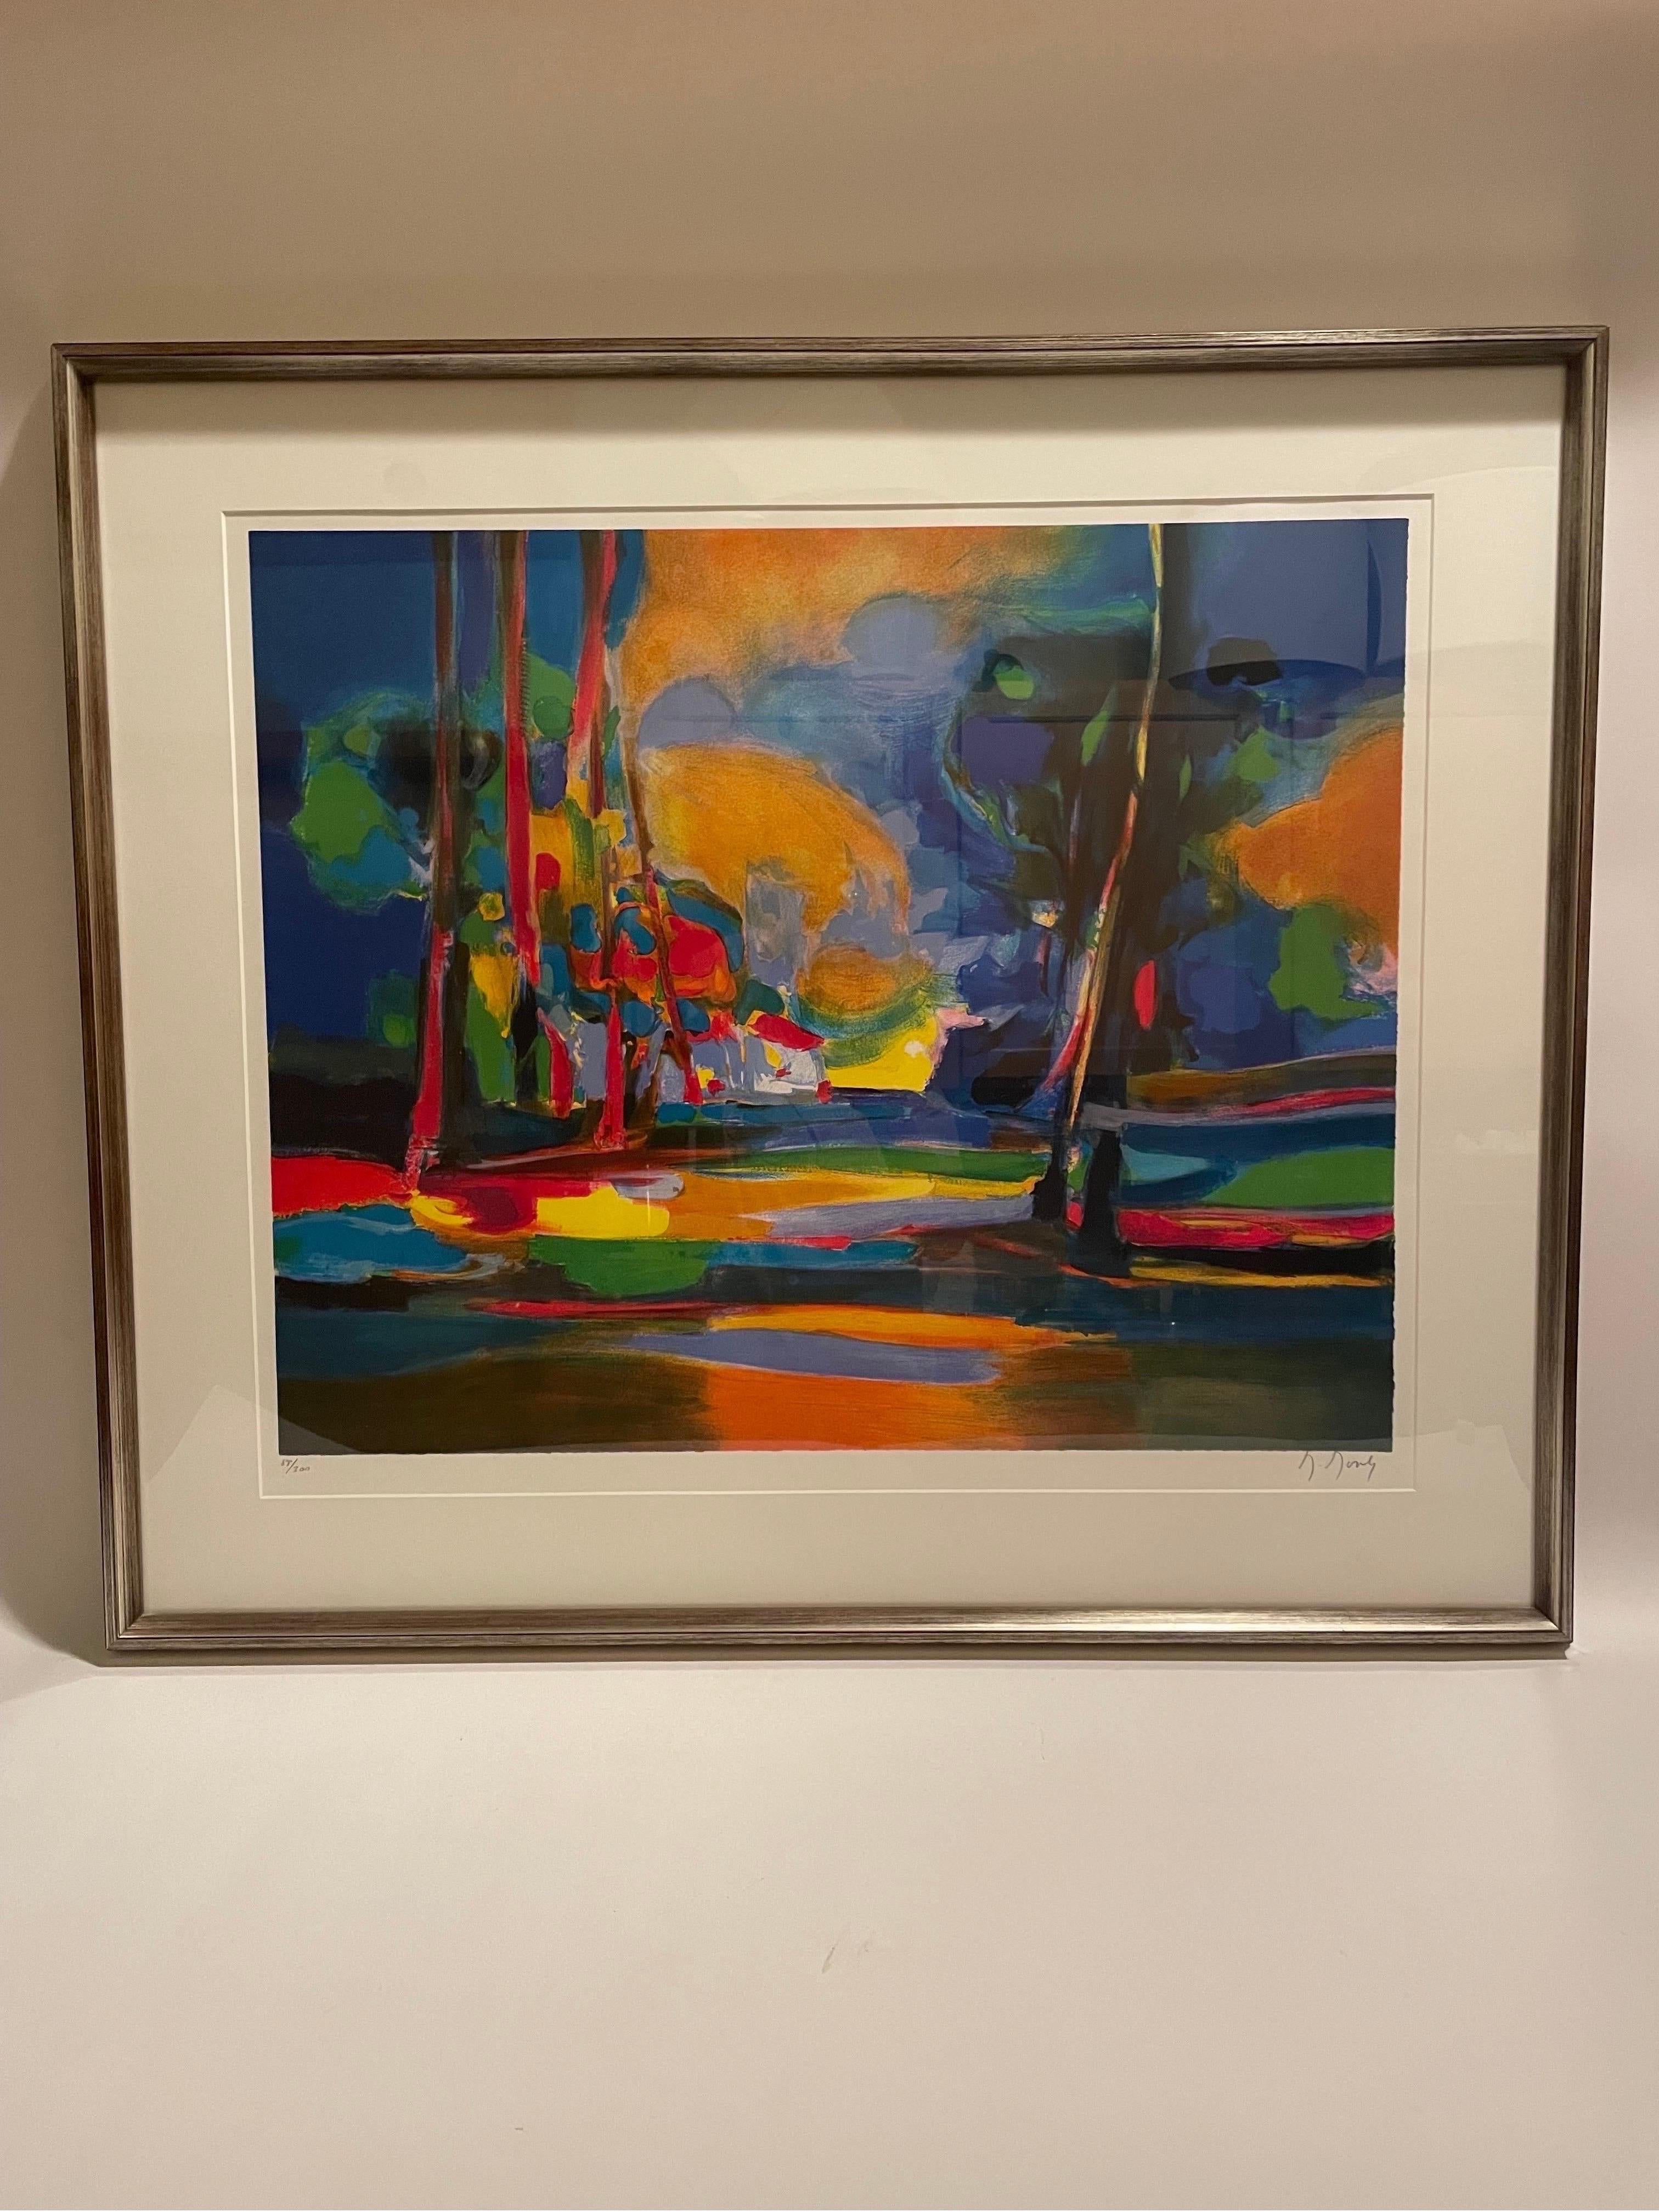 This is a wonderful colorful abstract lithograph 88/200 by French artist Marcel Mouly and signed on bottom right corner 